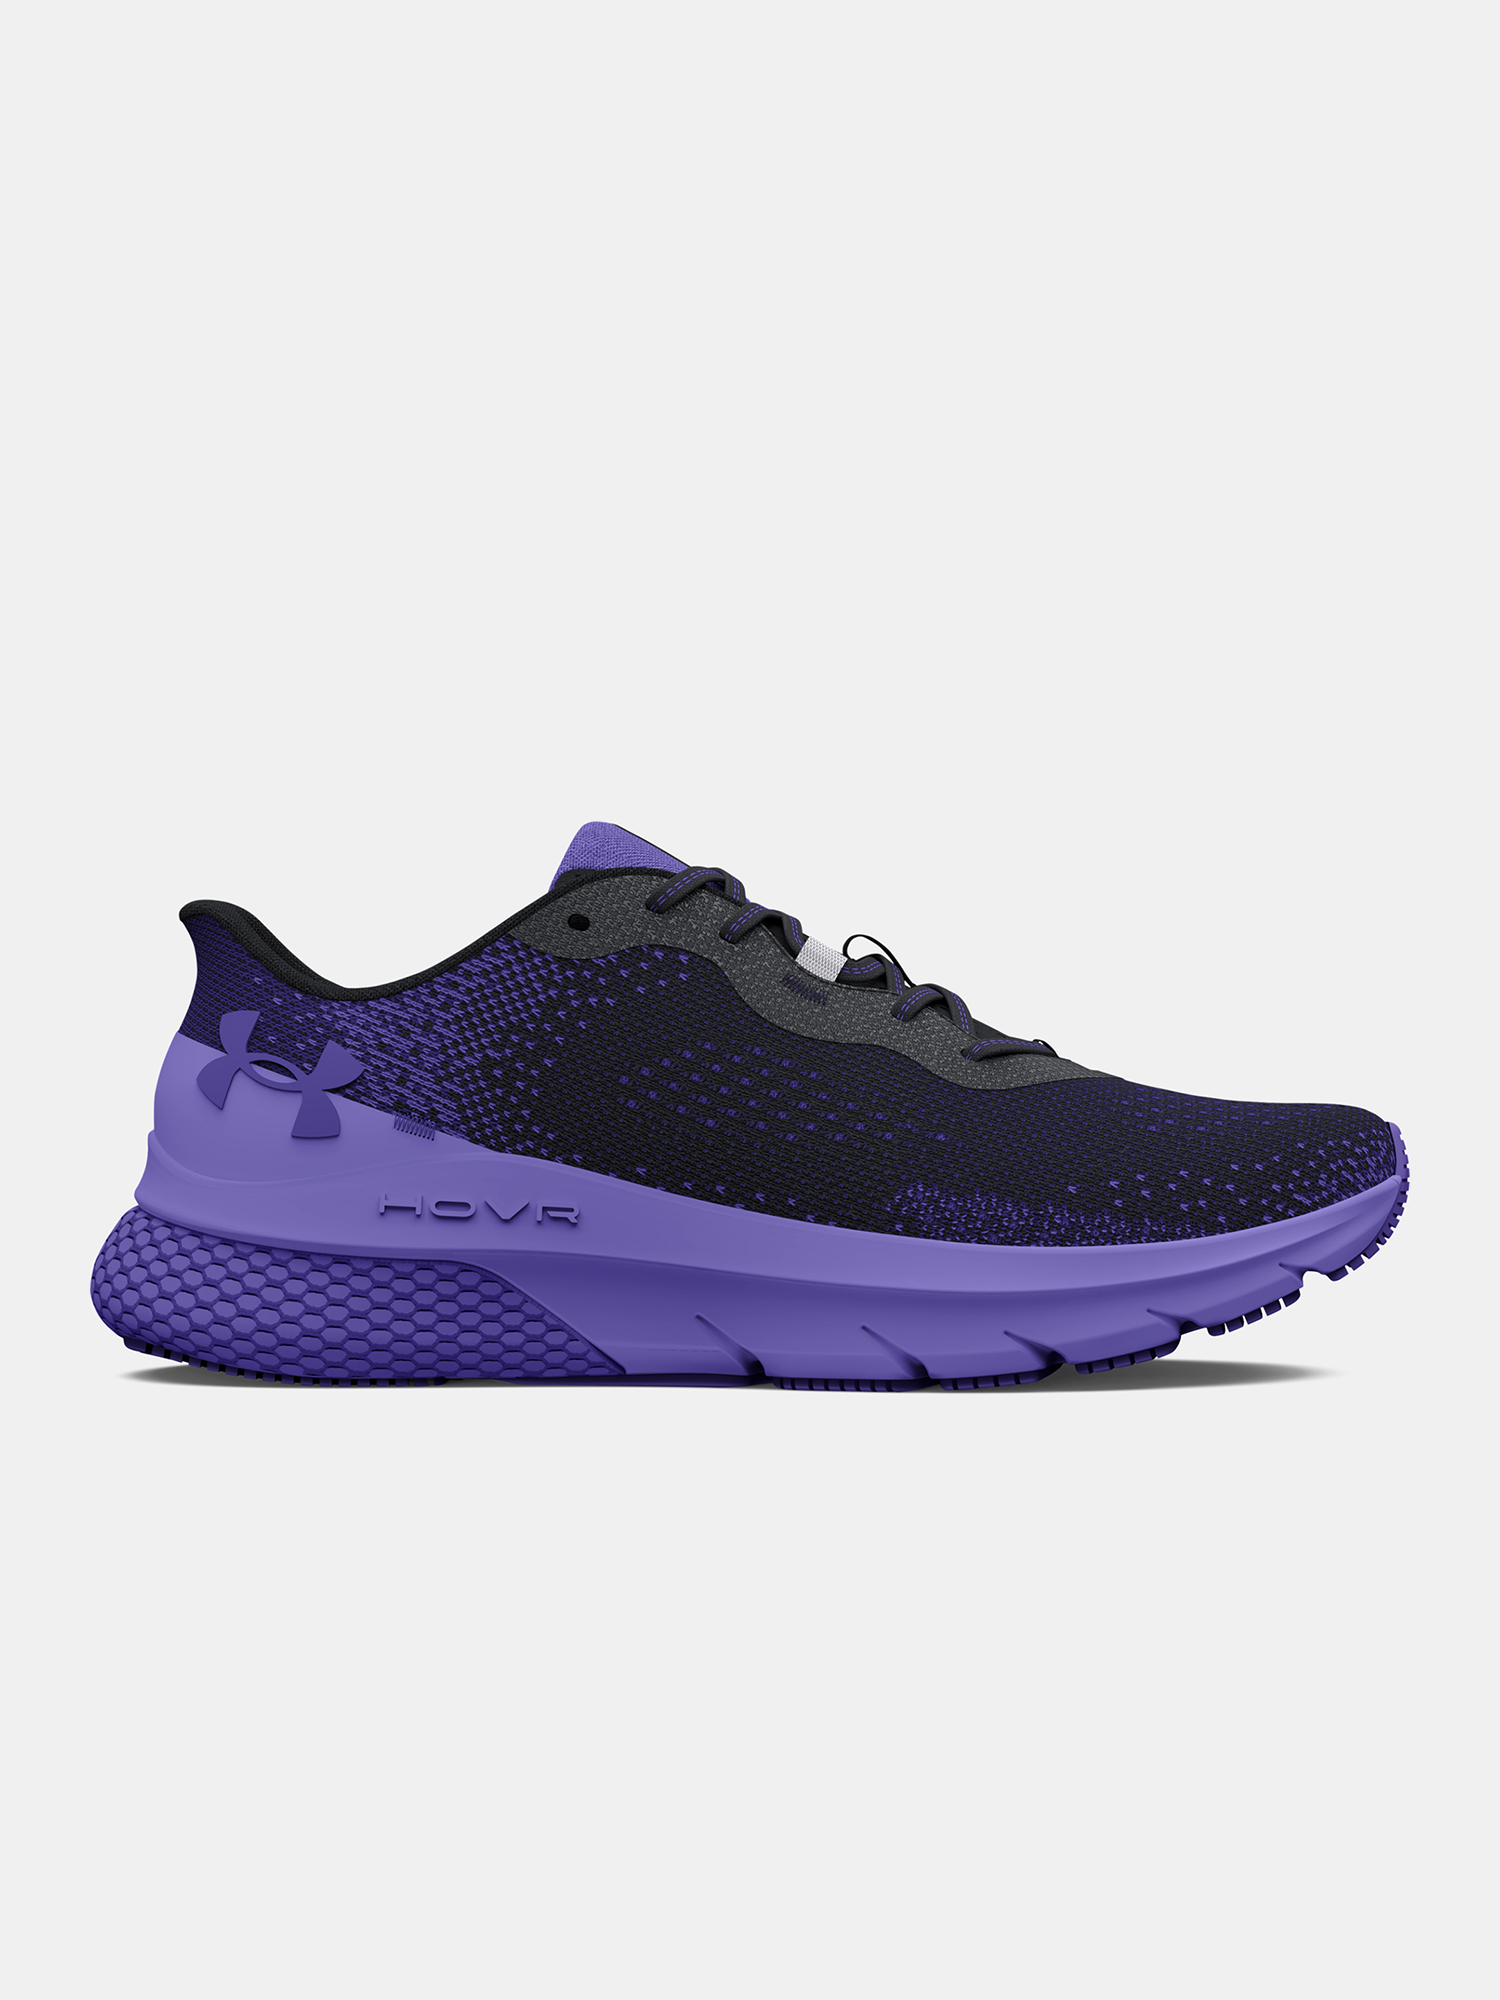 Under Armour Shoes UA W HOVR Turbulence 2-BLK - Women